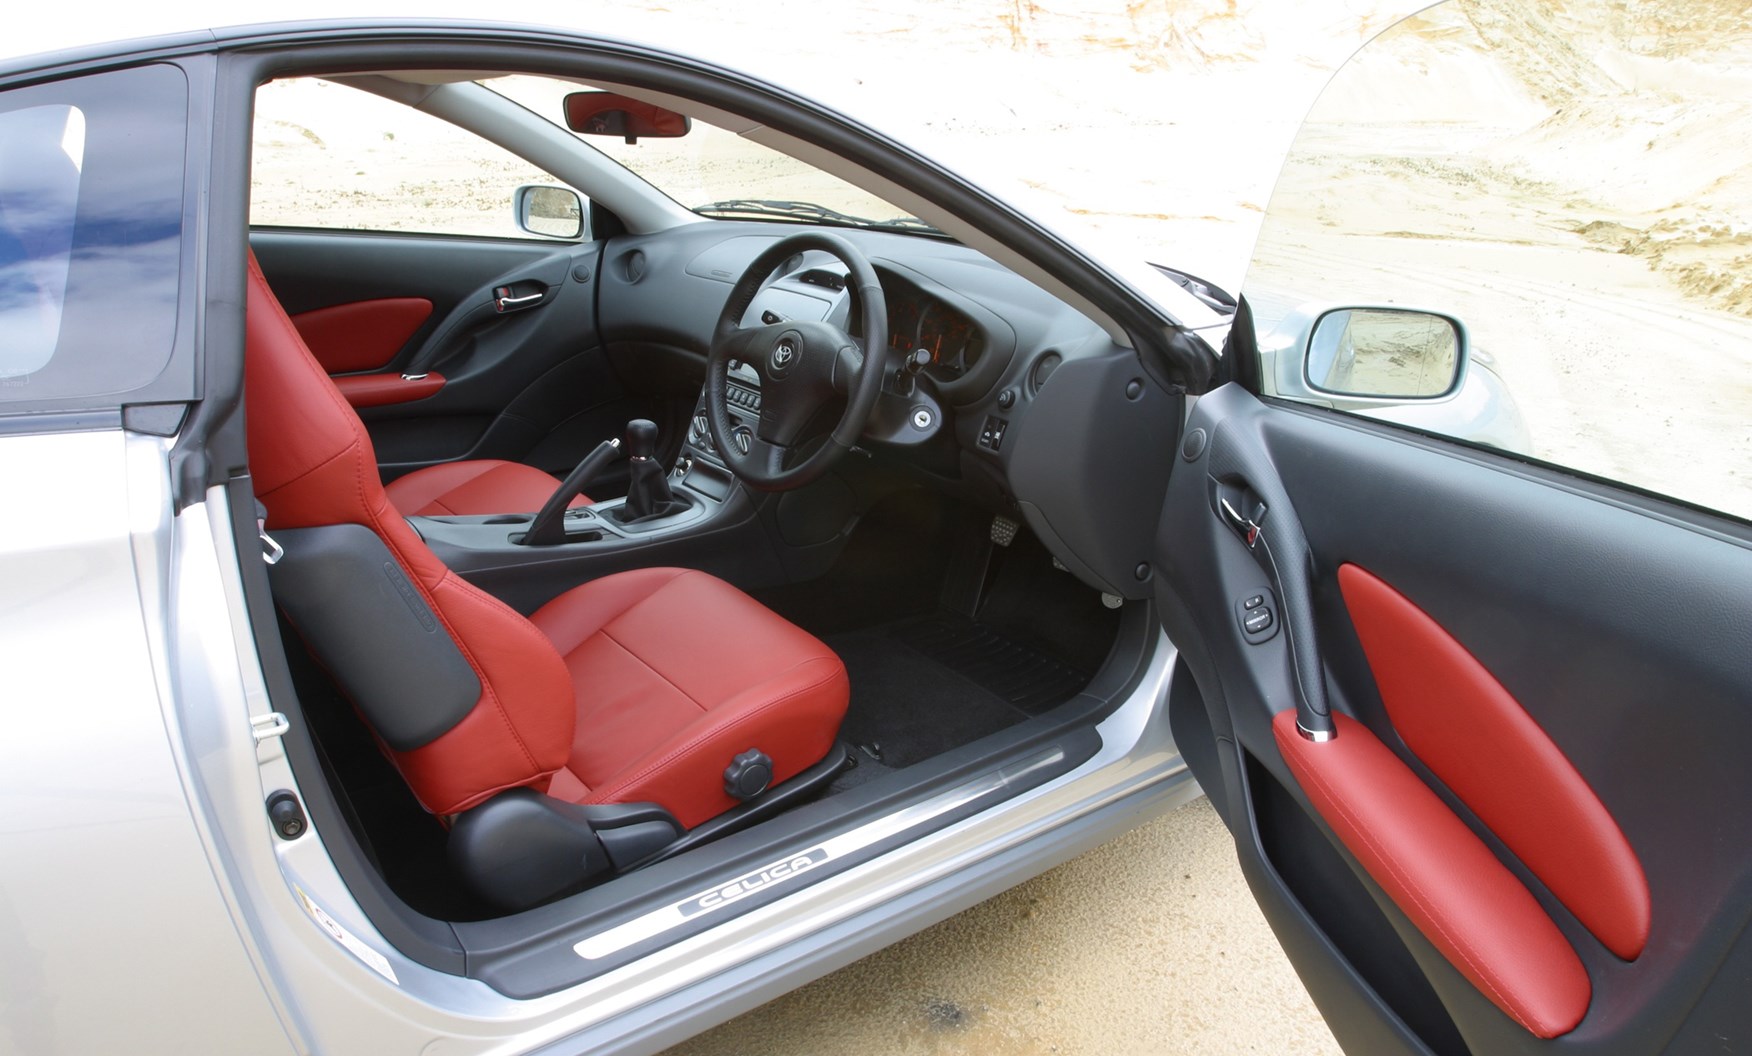 Used Toyota Celica Coupe 1999 2006 Interior Parkers